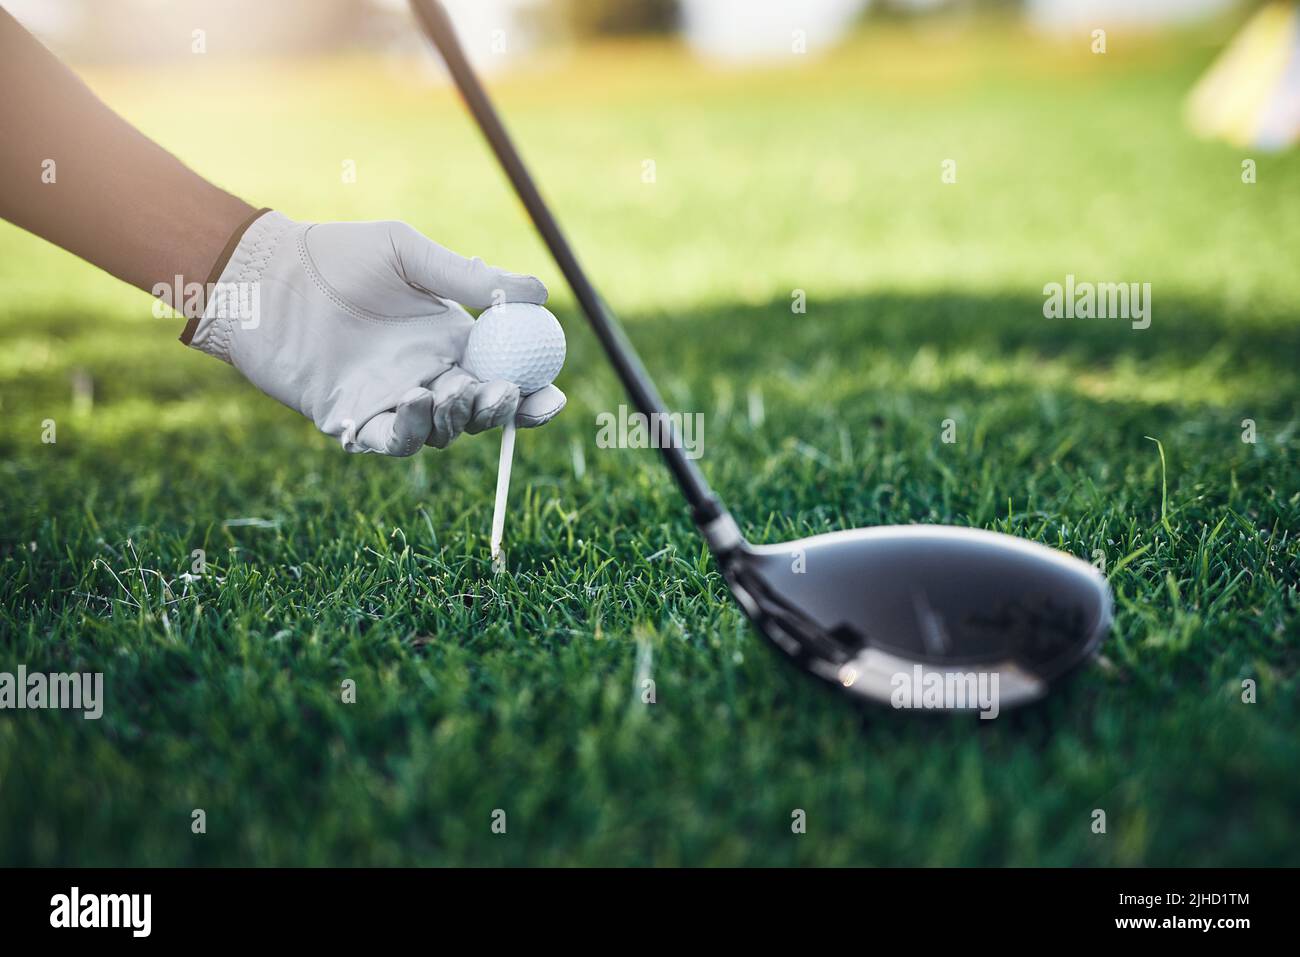 Im sorry but Im going to hit you far away. Closeup shot of an unrecognizable person putting a golf ball on top of a golf peg with a golf club standing Stock Photo